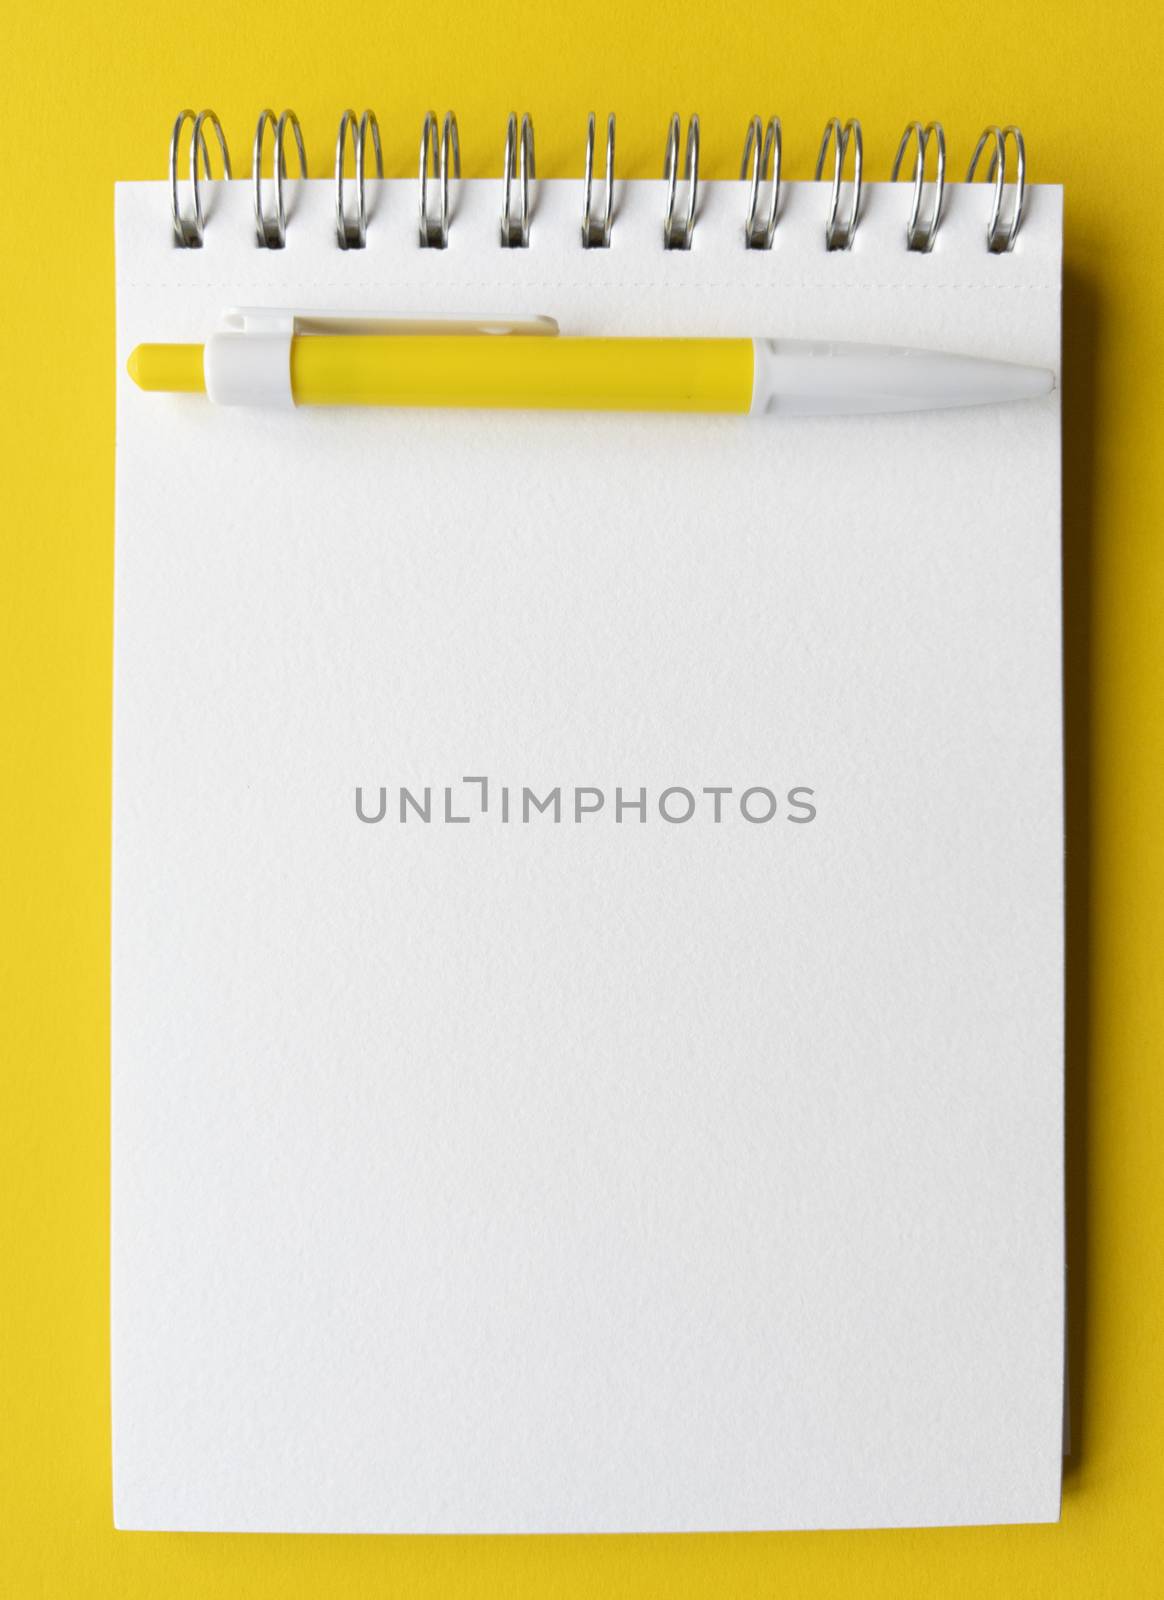 Blank sheet of notebook with pen on it. Educational concept in yellow and white colors. Stock photography. by anna_artist